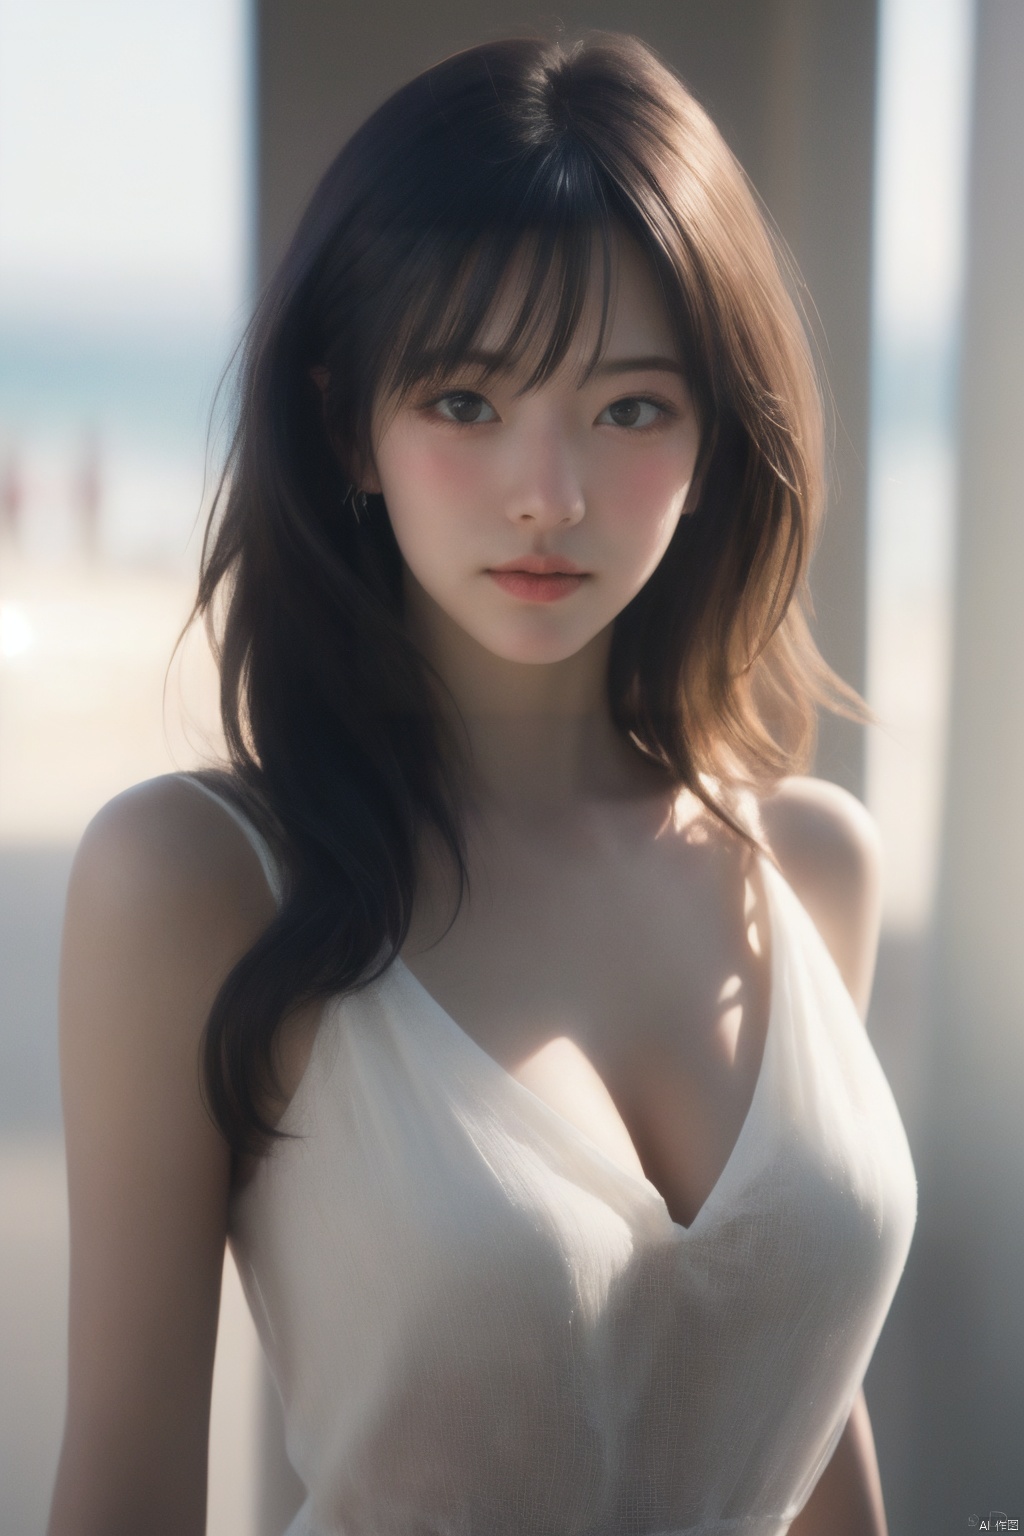  1girl,1girl,looking at viewer,RAW photo,photorealistic:1.37,realistic,highly detailed CG unified 8K wallpapers,thick body:1.1,straight from front,HQ skin:1.8,shiny skin,8k uhd,Fujifilm XT3,professional lighting:1.6,Immaculate skin,jujingyi,Cowboy lens,Upper body,soft lighting,film grain,high quality,white dress,bra,big boobs,white_skin,film sense,grainy,, pld